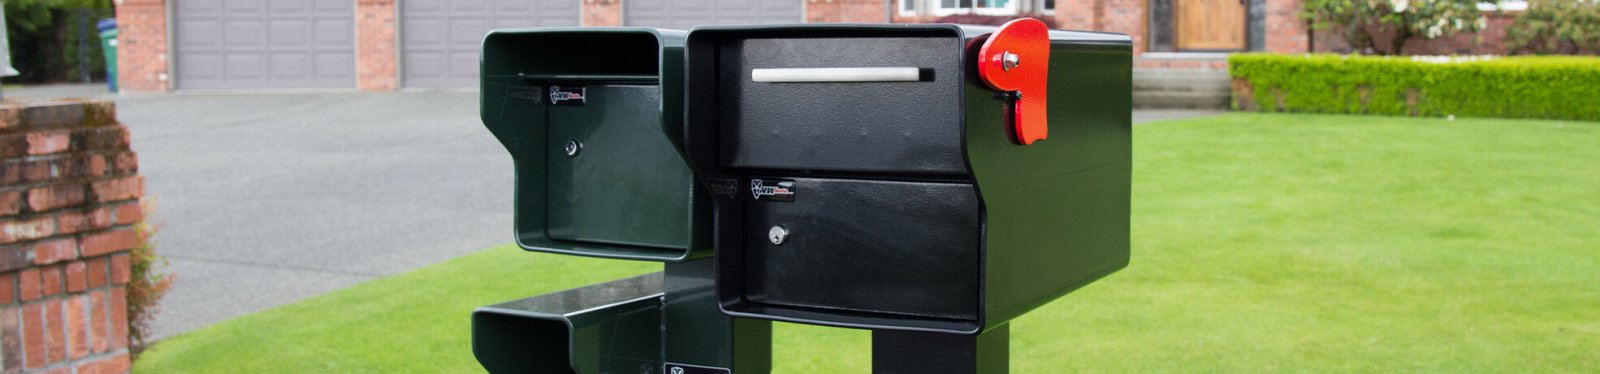 High Security Mailboxes | Northwest Safe